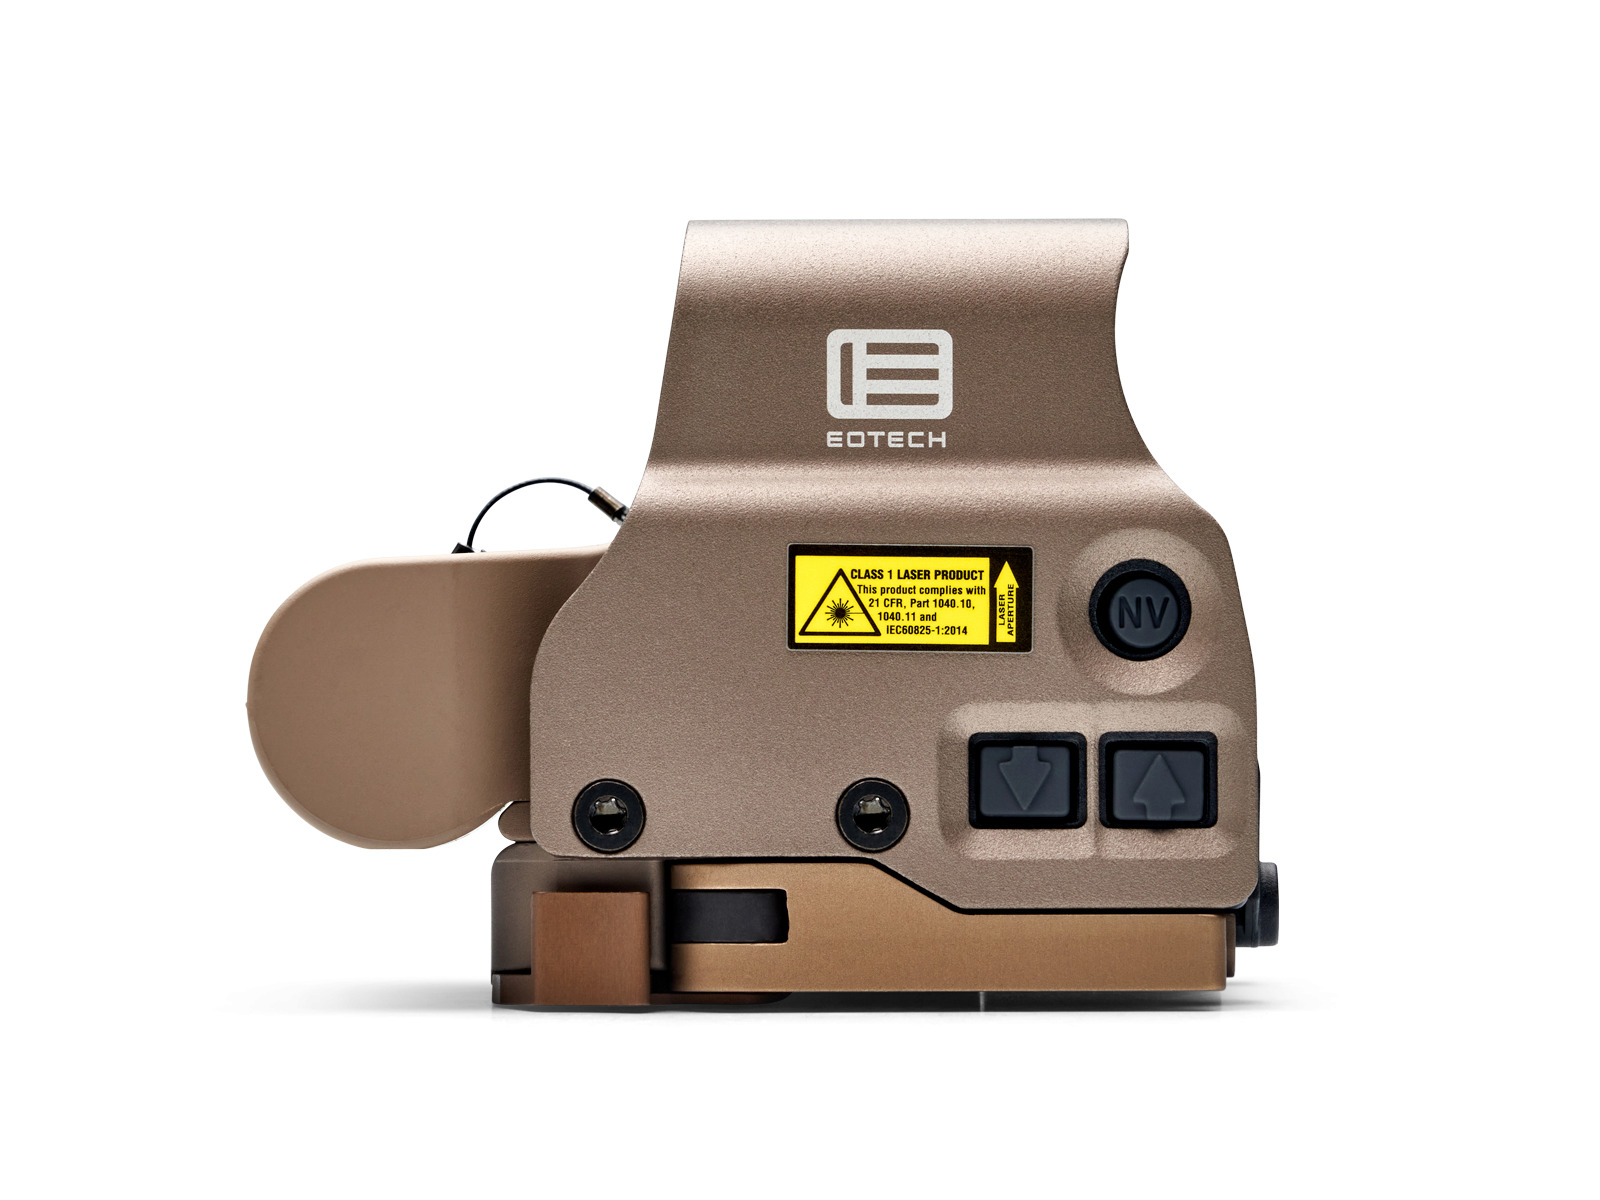 AIRSOFT97 沖縄本店 通販部 / 【実物】EoTech EXPS3-0 TAN ホロサイト